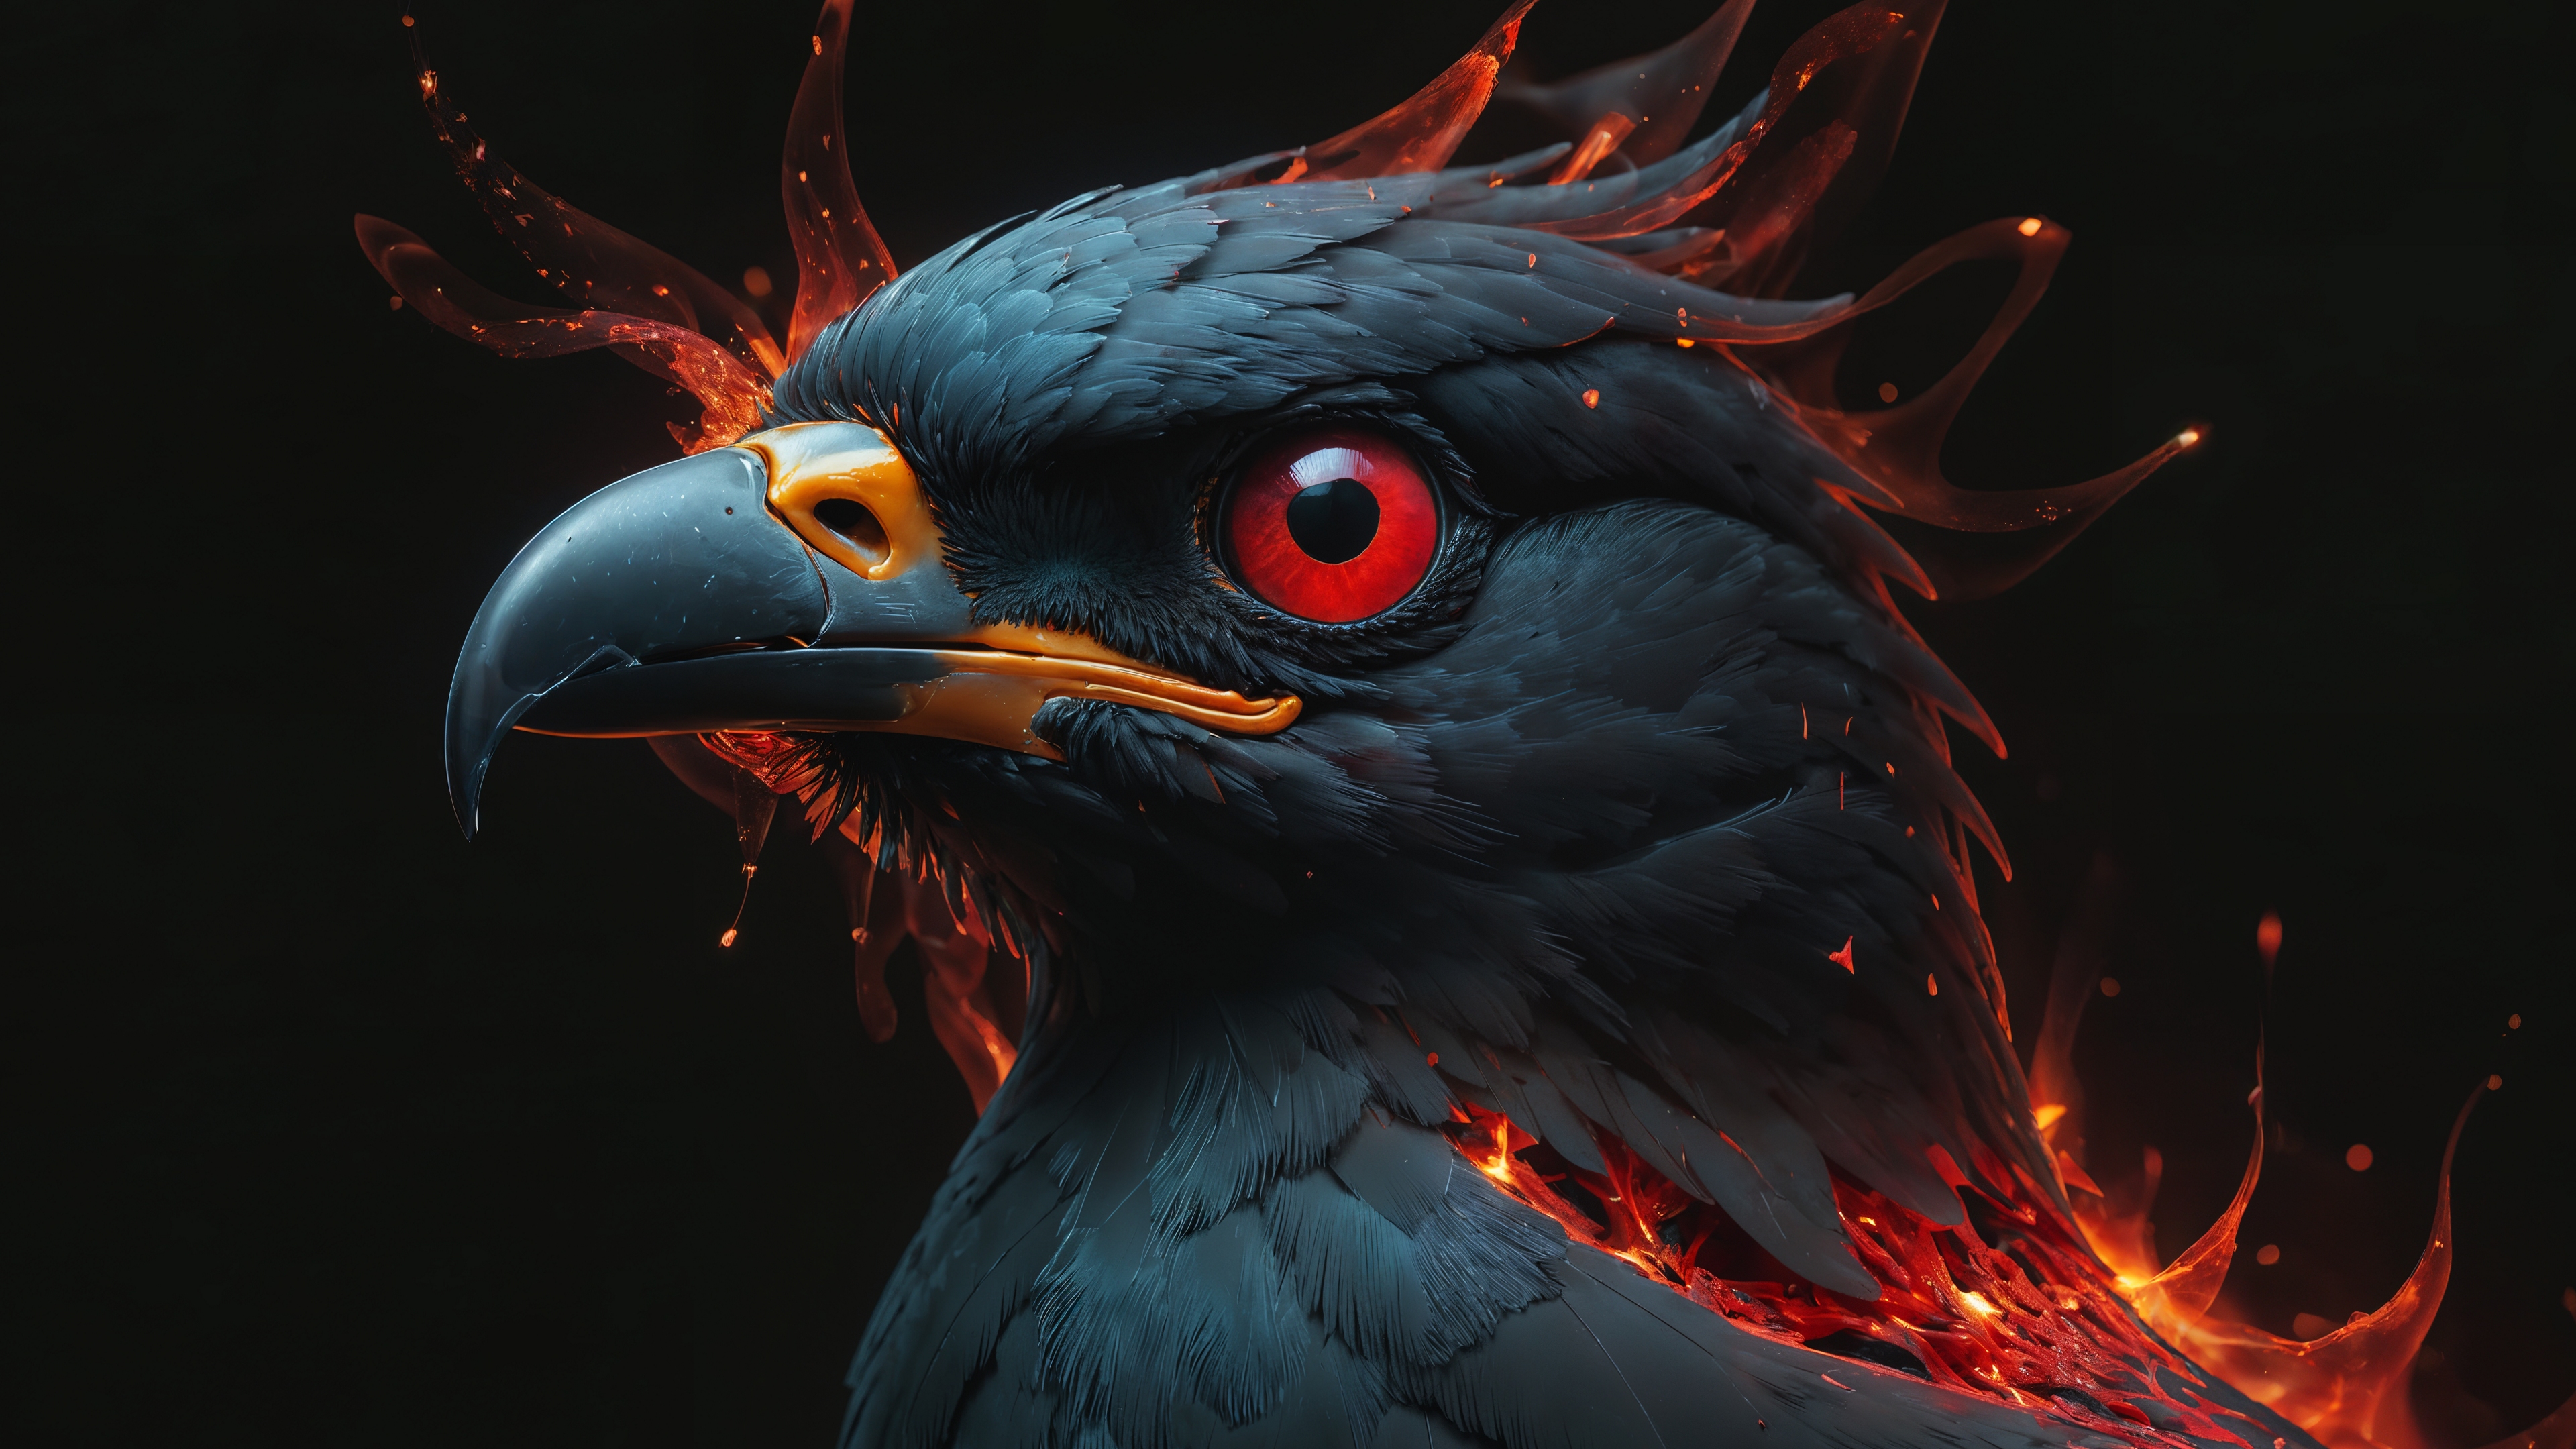 Free photo The black fiery bird with red eyes